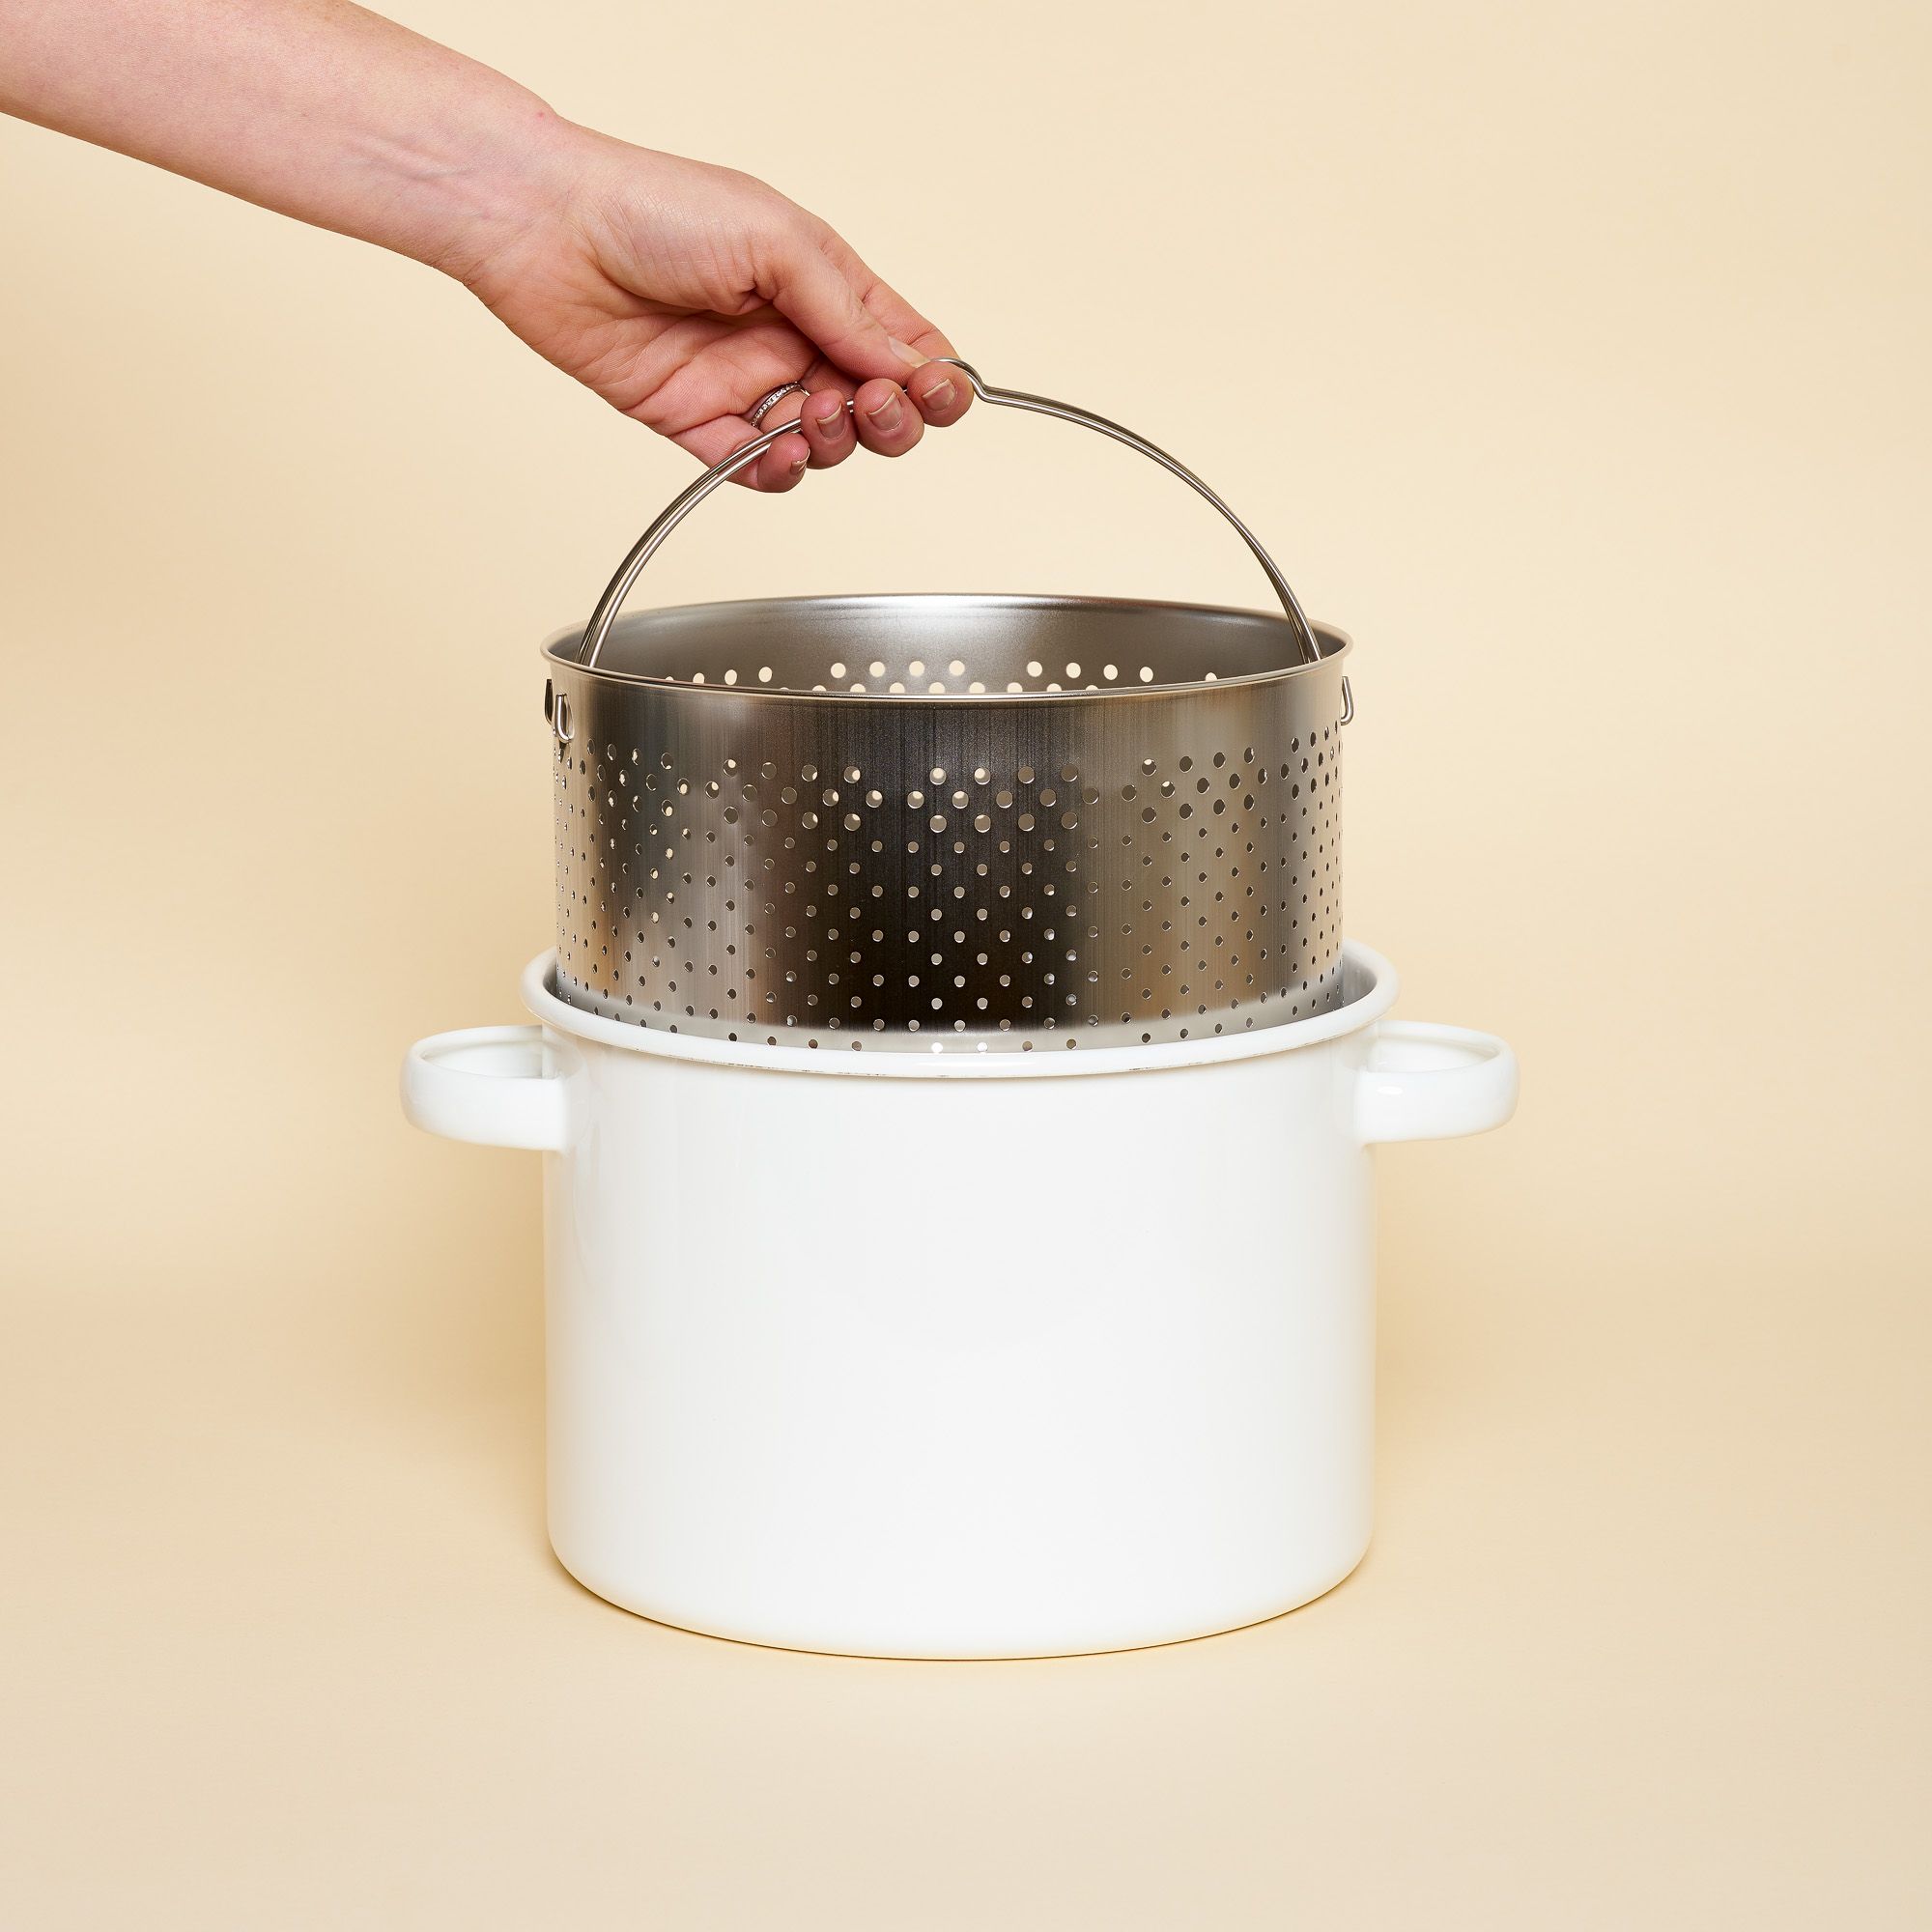 A 5.7 litre pasta pan that has the maple handle and comes with a stainless steel strainer that fits inside the pot.